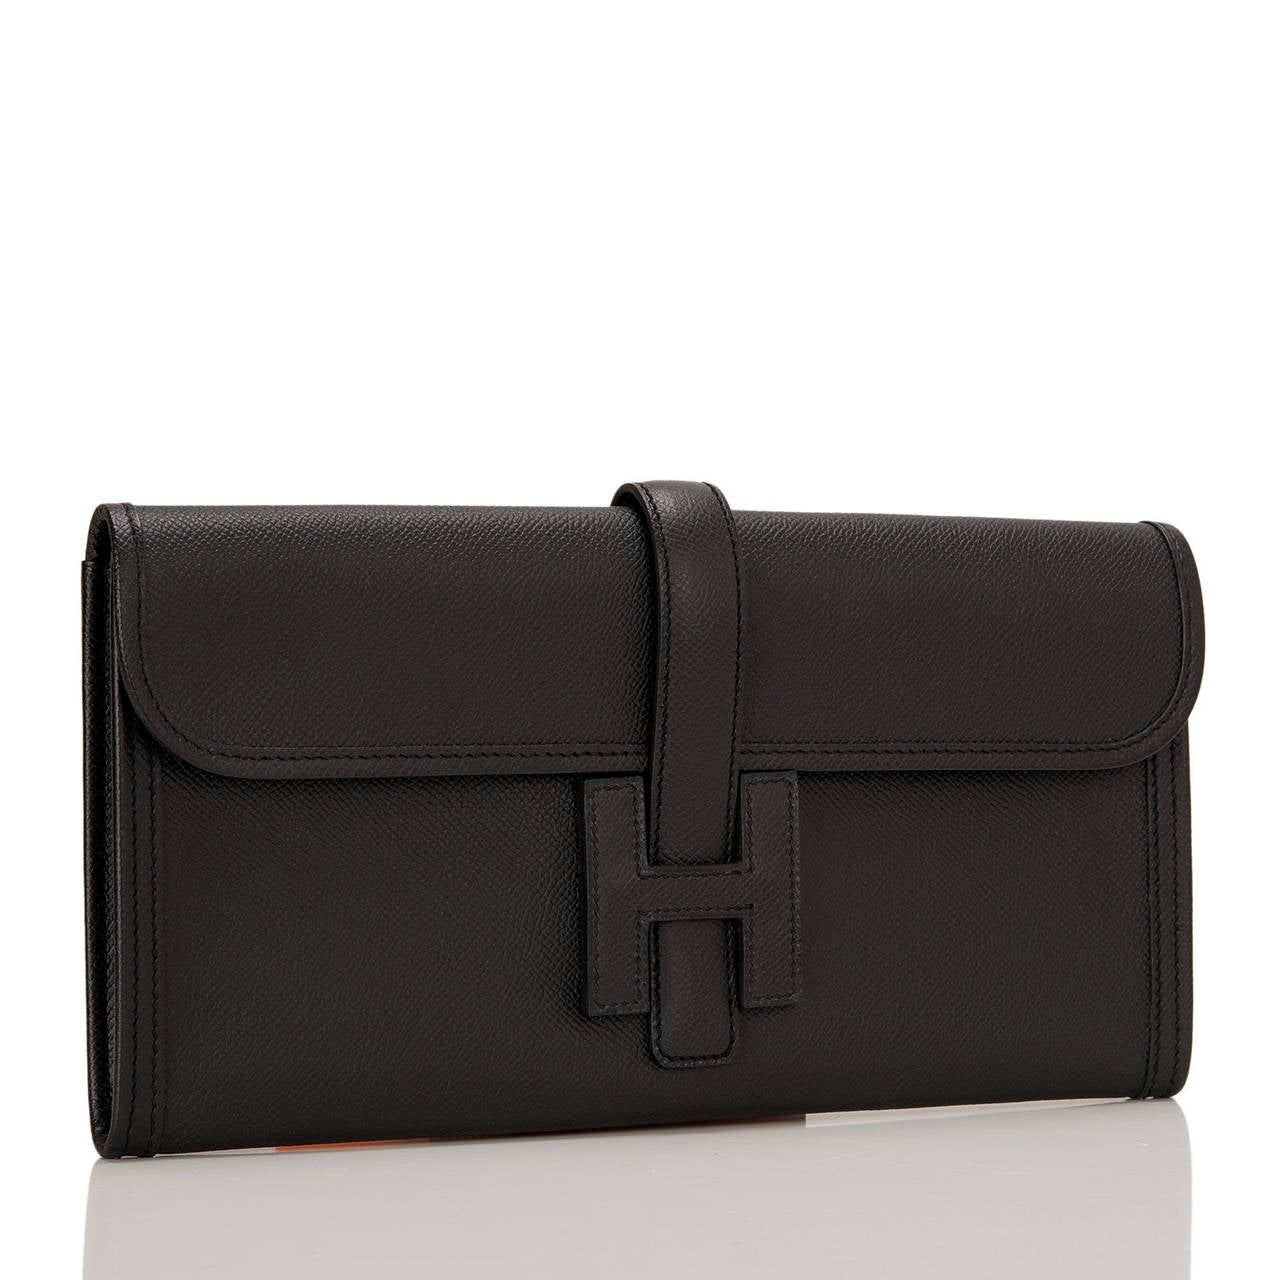 Hermes Black epsom leather Jige Elan clutch 29cm

This style features tonal stitching and front 